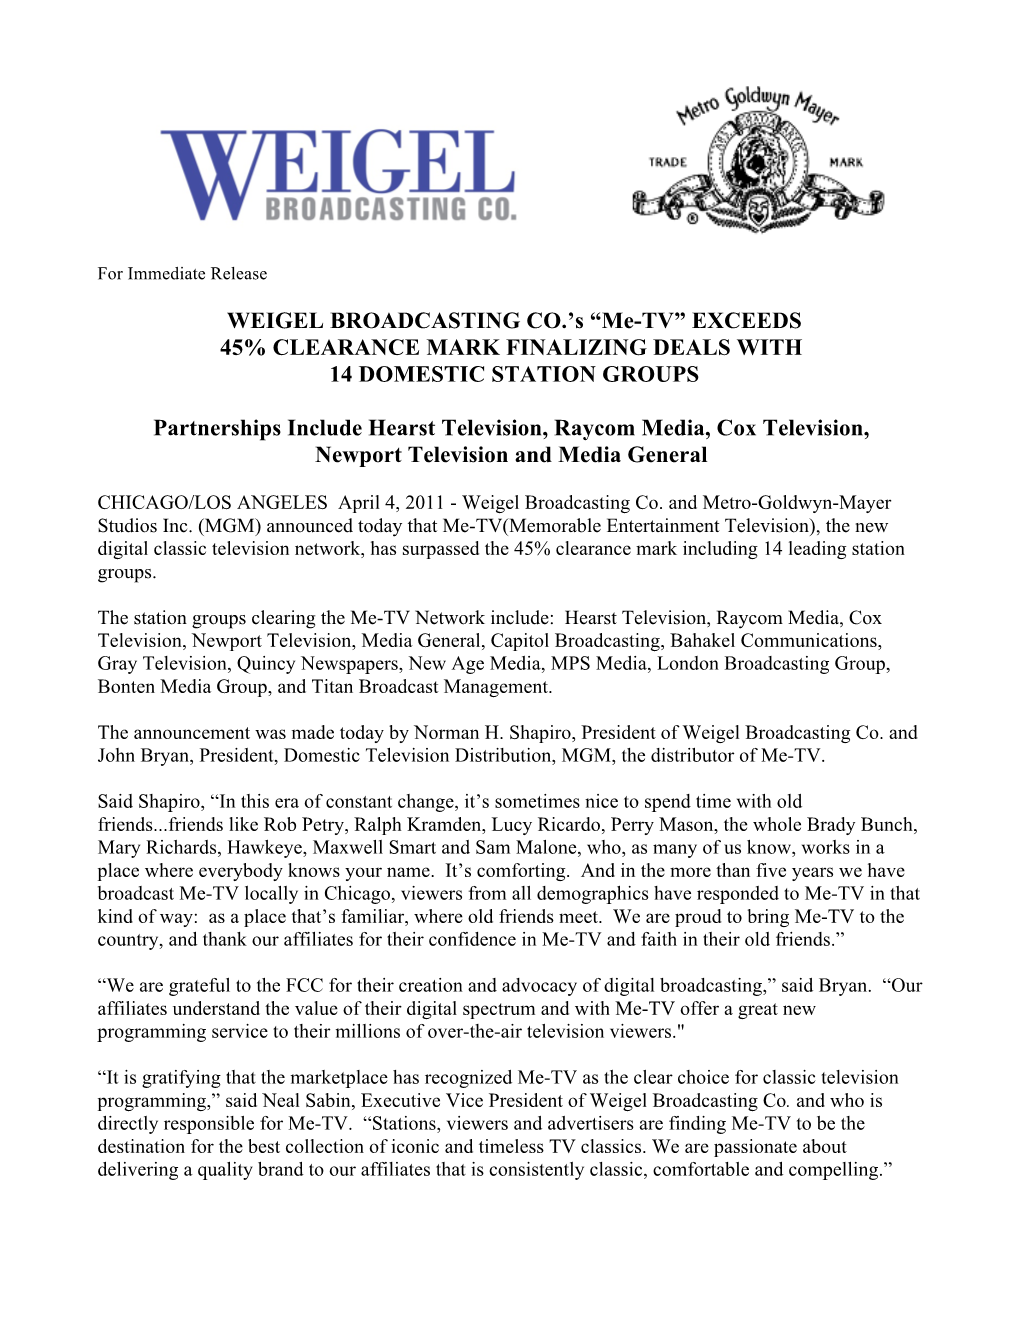 WEIGEL BROADCASTING CO.’S “Me-TV” EXCEEDS 45% CLEARANCE MARK FINALIZING DEALS with 14 DOMESTIC STATION GROUPS